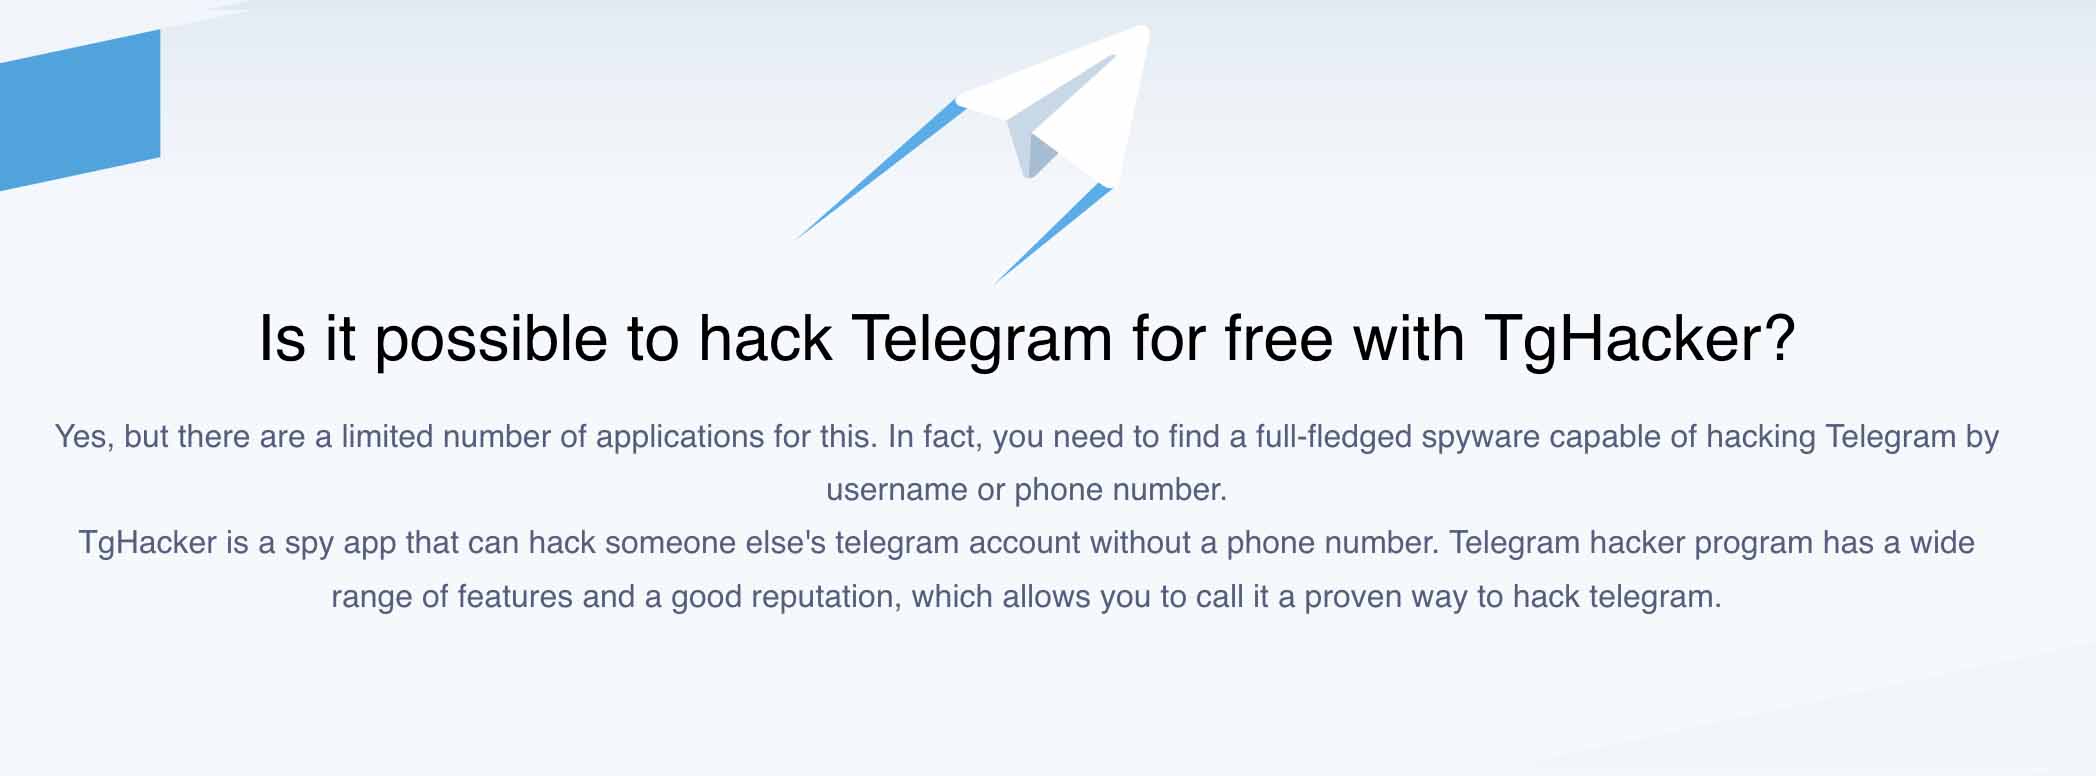 Real hacking of Telegram with TgHacker